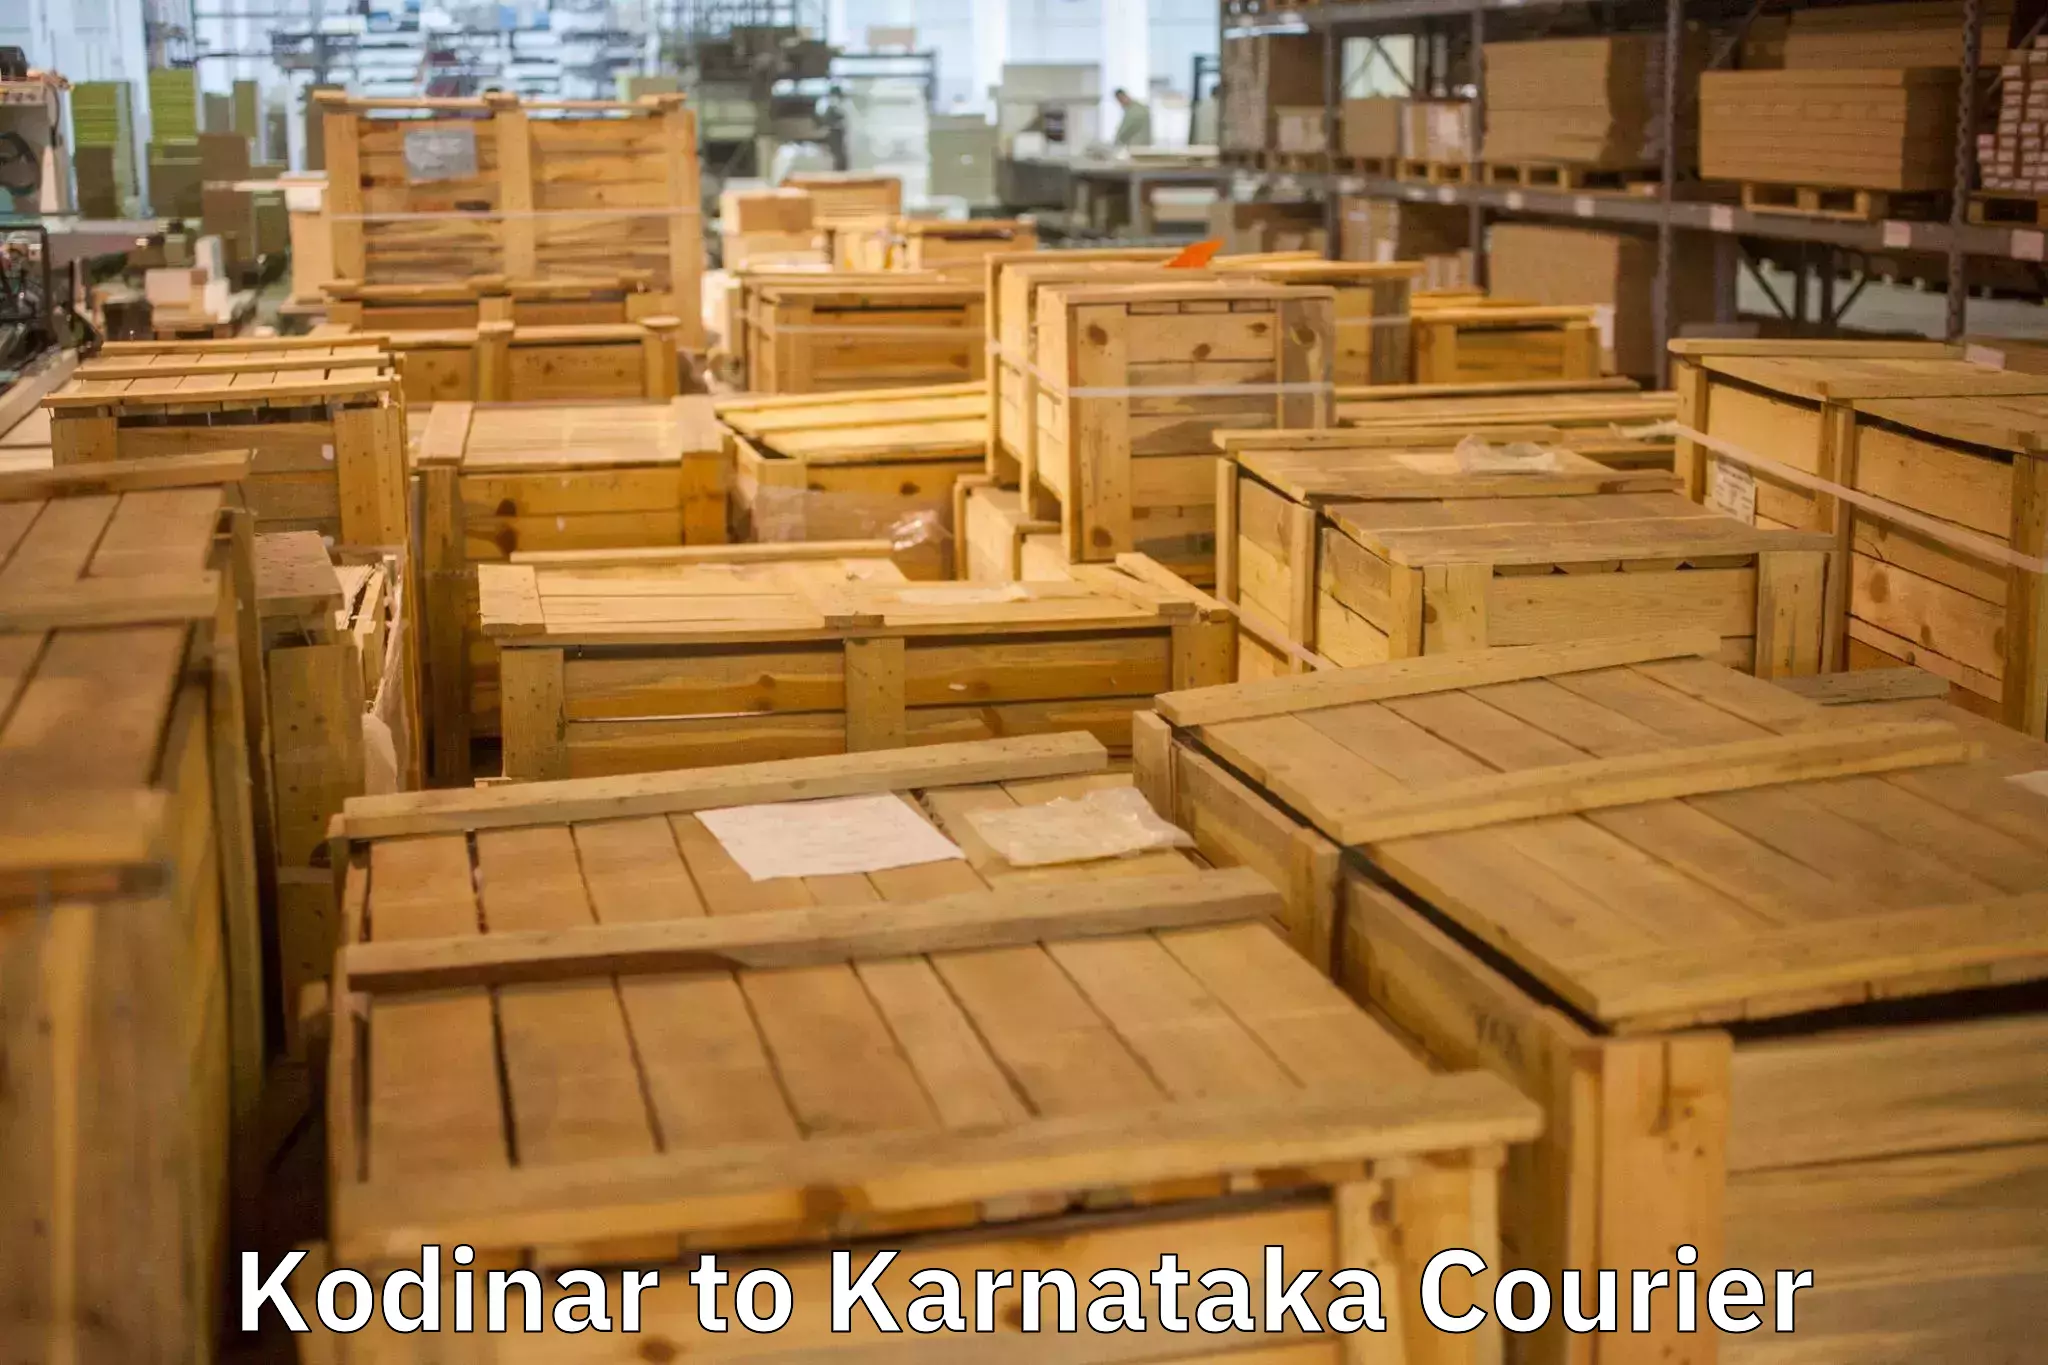 Full-service furniture transport Kodinar to Manipal Academy of Higher Education